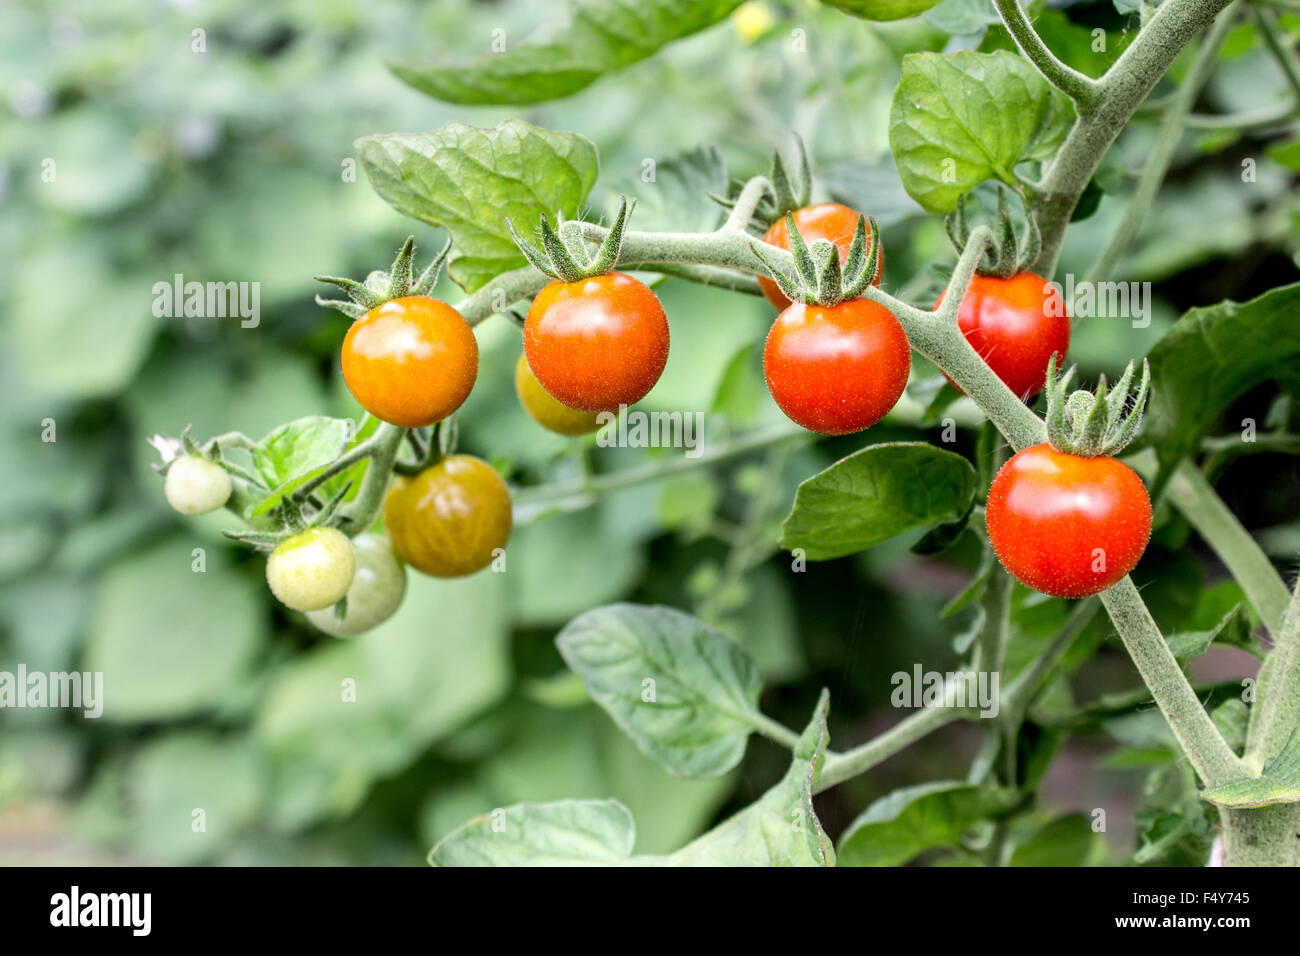 Cluster tomato with green and red fruit Stock Photo